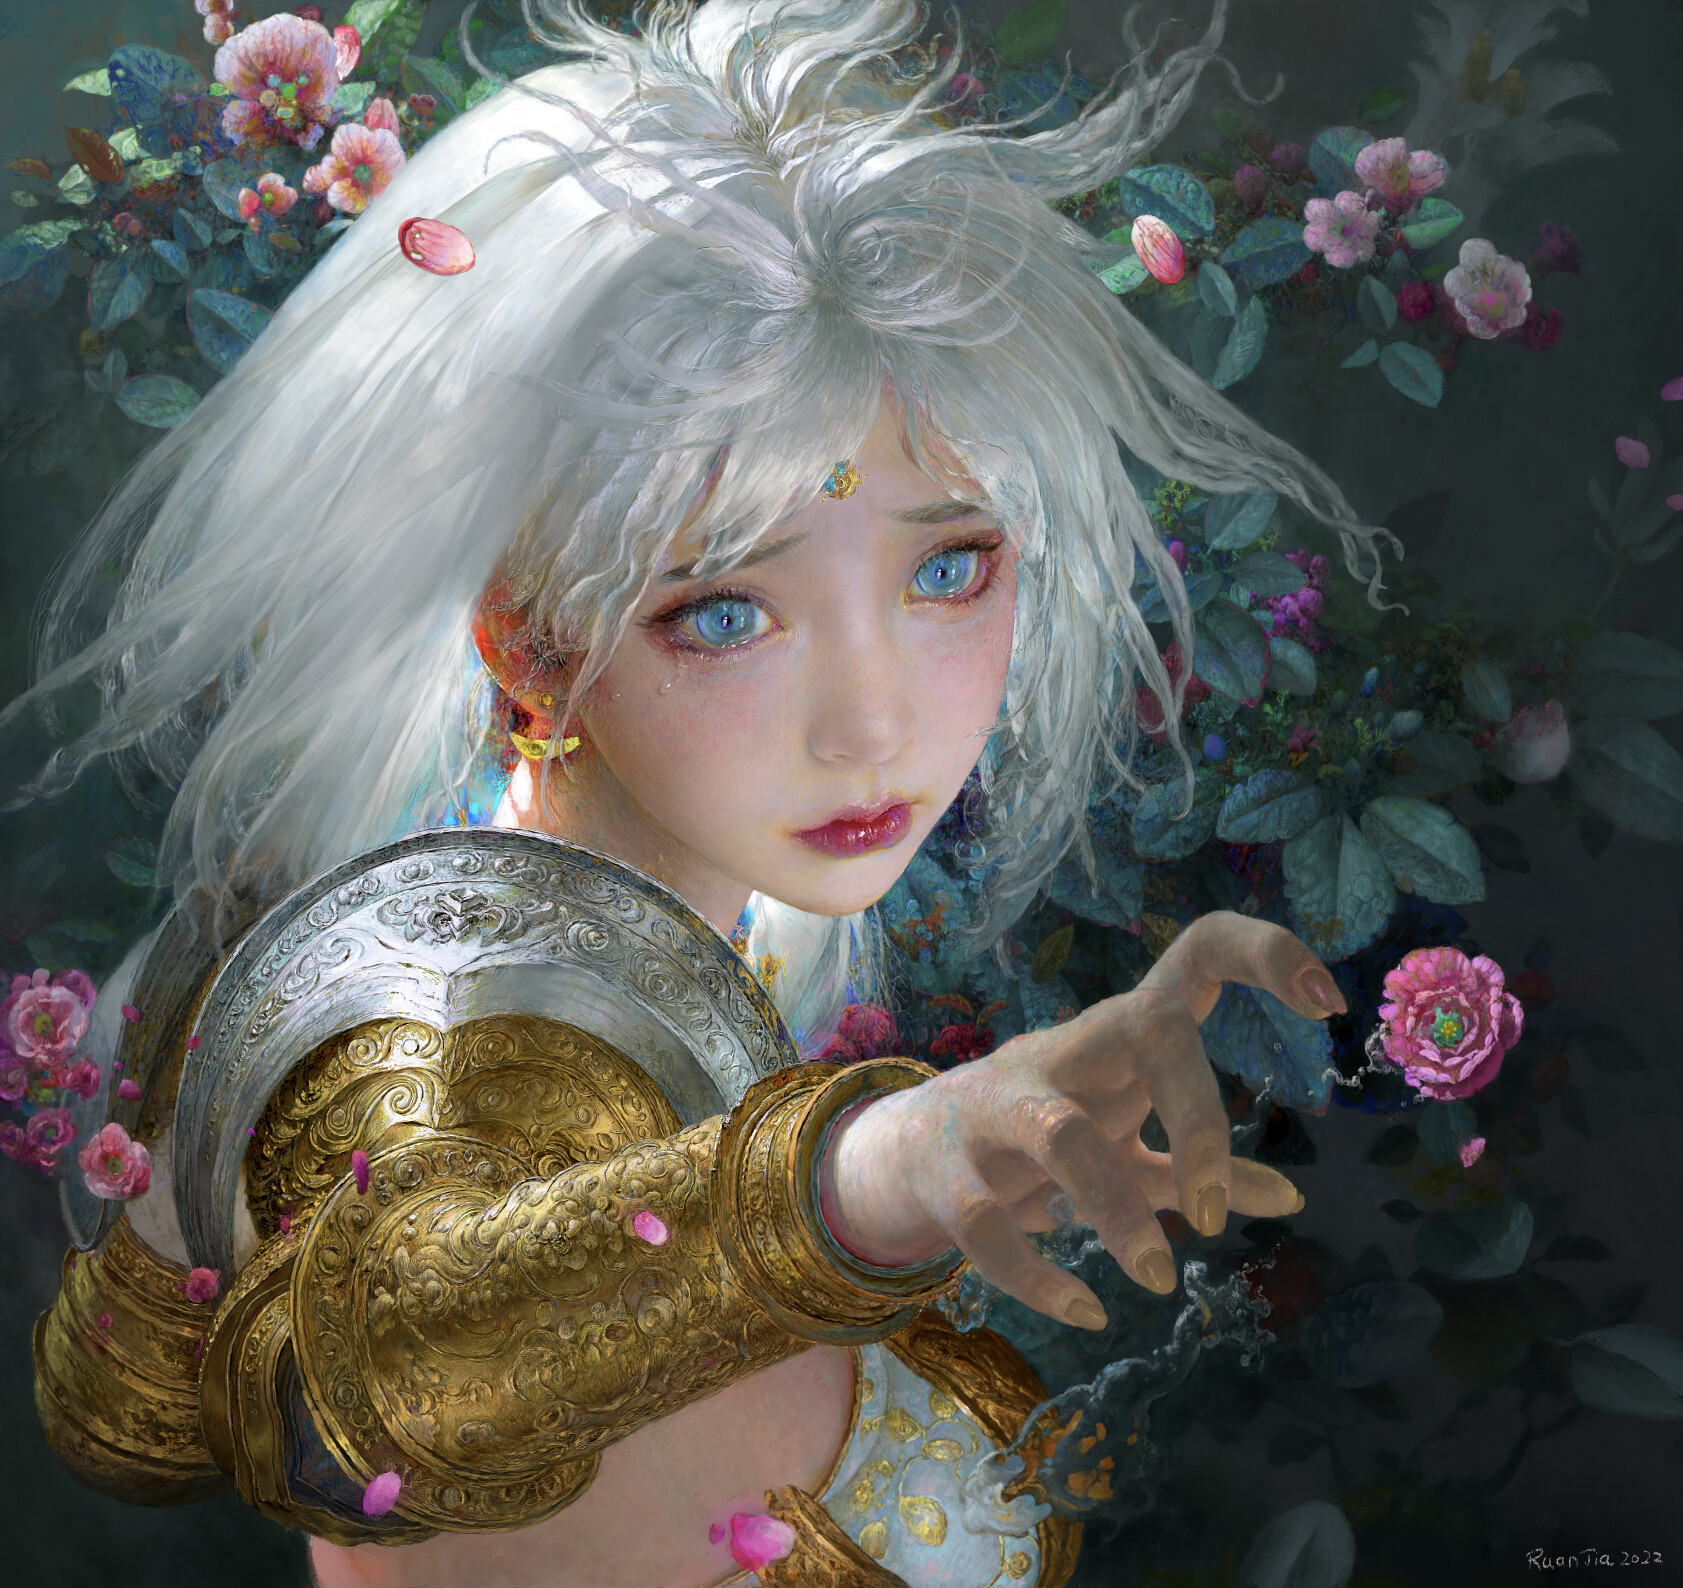 General 1683x1588 Ruan Jia drawing women blue eyes flowers pink gold portrait tears 2022 (year) signature closed mouth looking away short hair white hair leaves armor petals earring arms reaching fantasy art fantasy girl